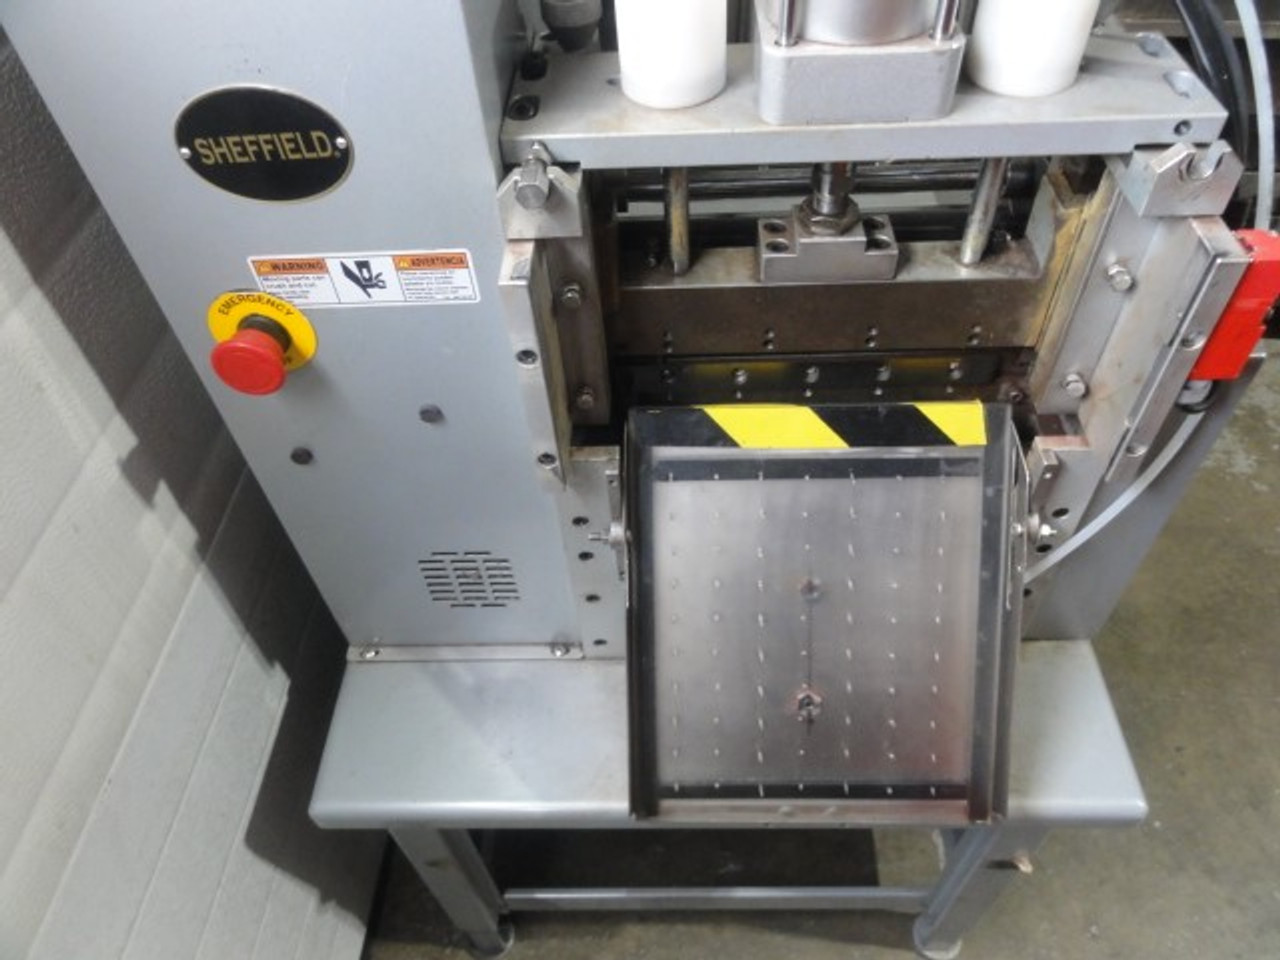 Sheffield Model N/A Cold Cutter with 9 Inch Blade, w/out Control Panel